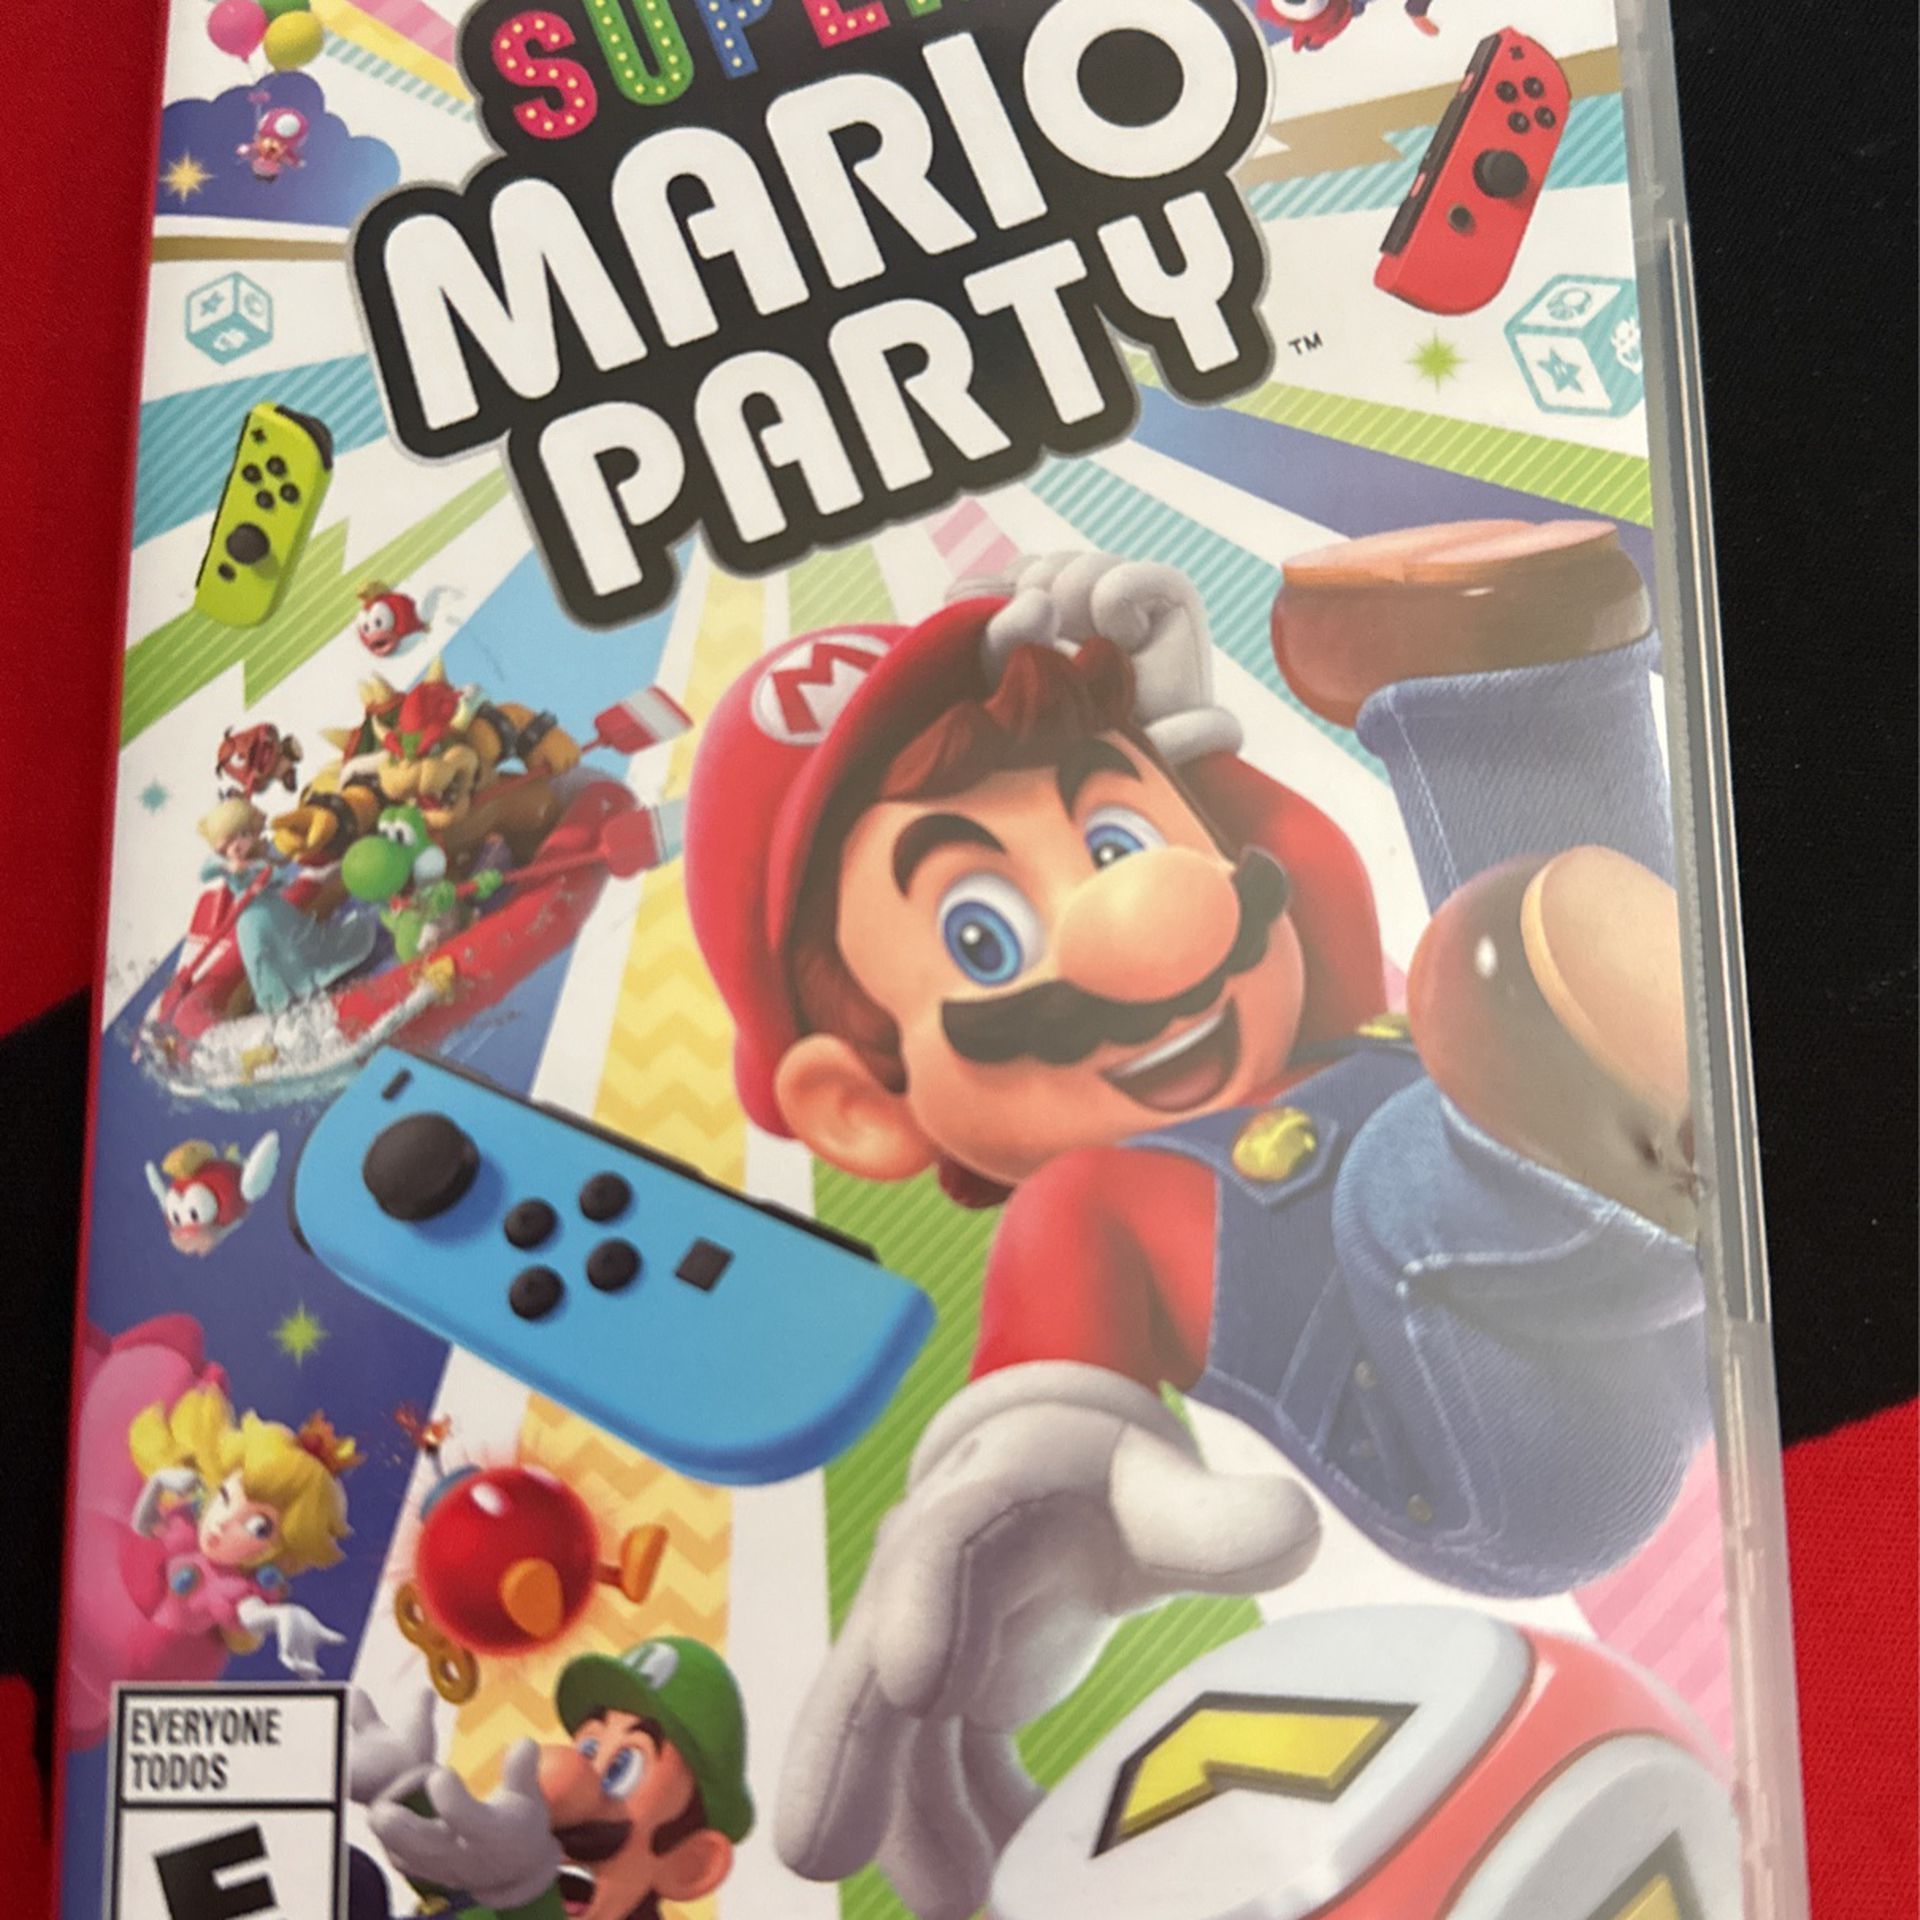 Super Mario Party (Switch)